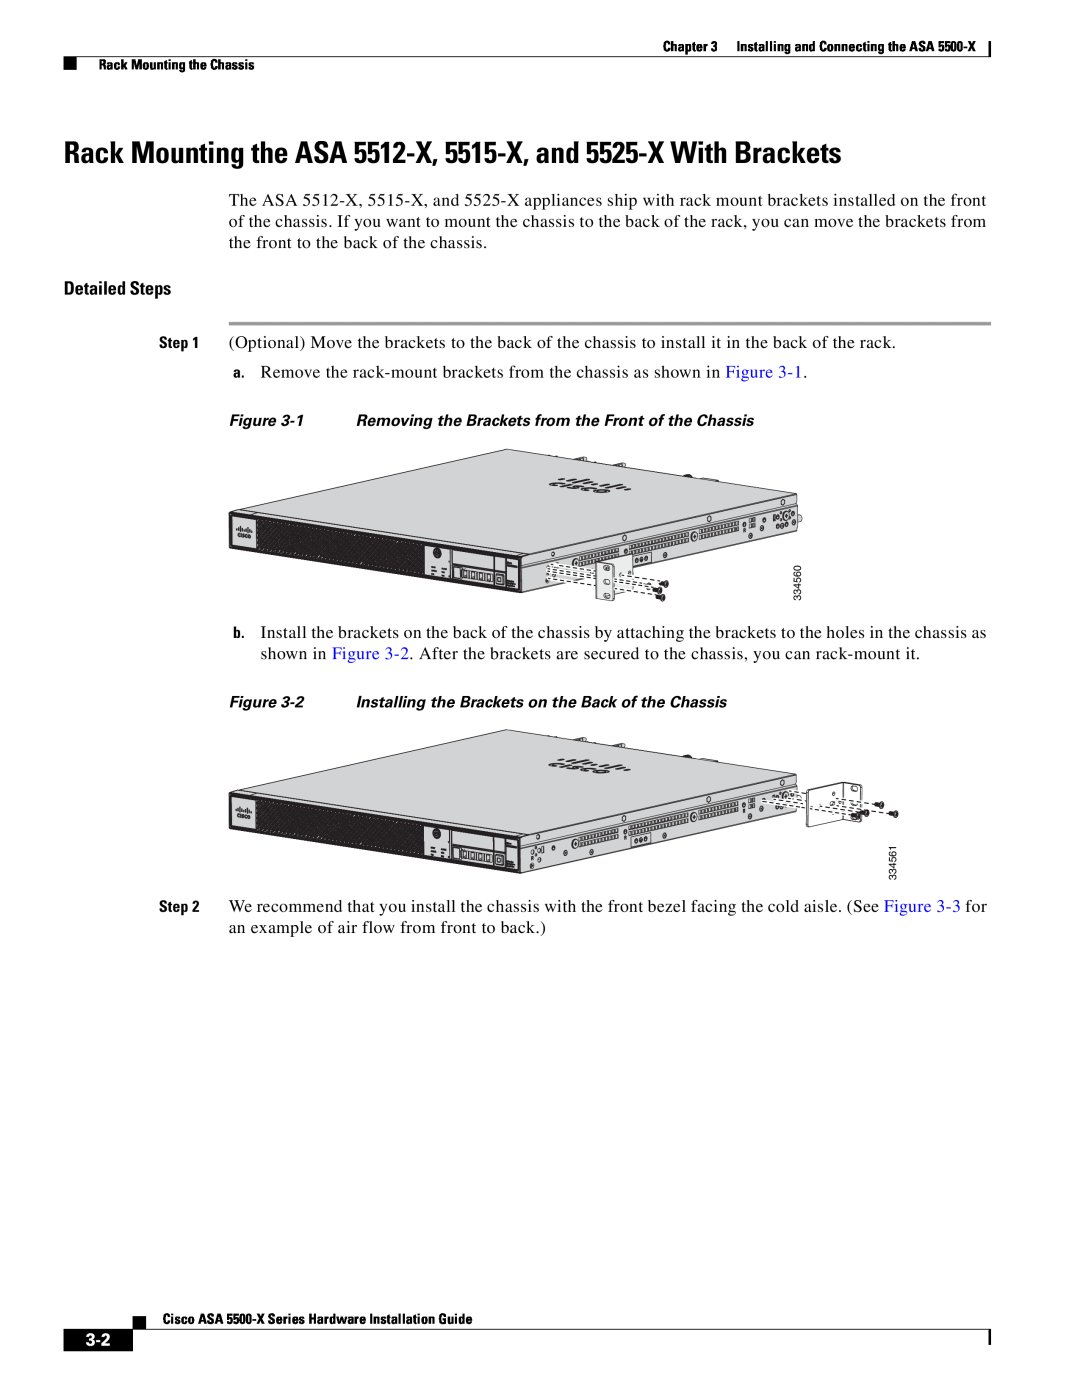 Cisco Systems ASA5515K9, kygjygcjgf manual Rack Mounting the ASA 5512-X, 5515-X, and 5525-X With Brackets, Detailed Steps 